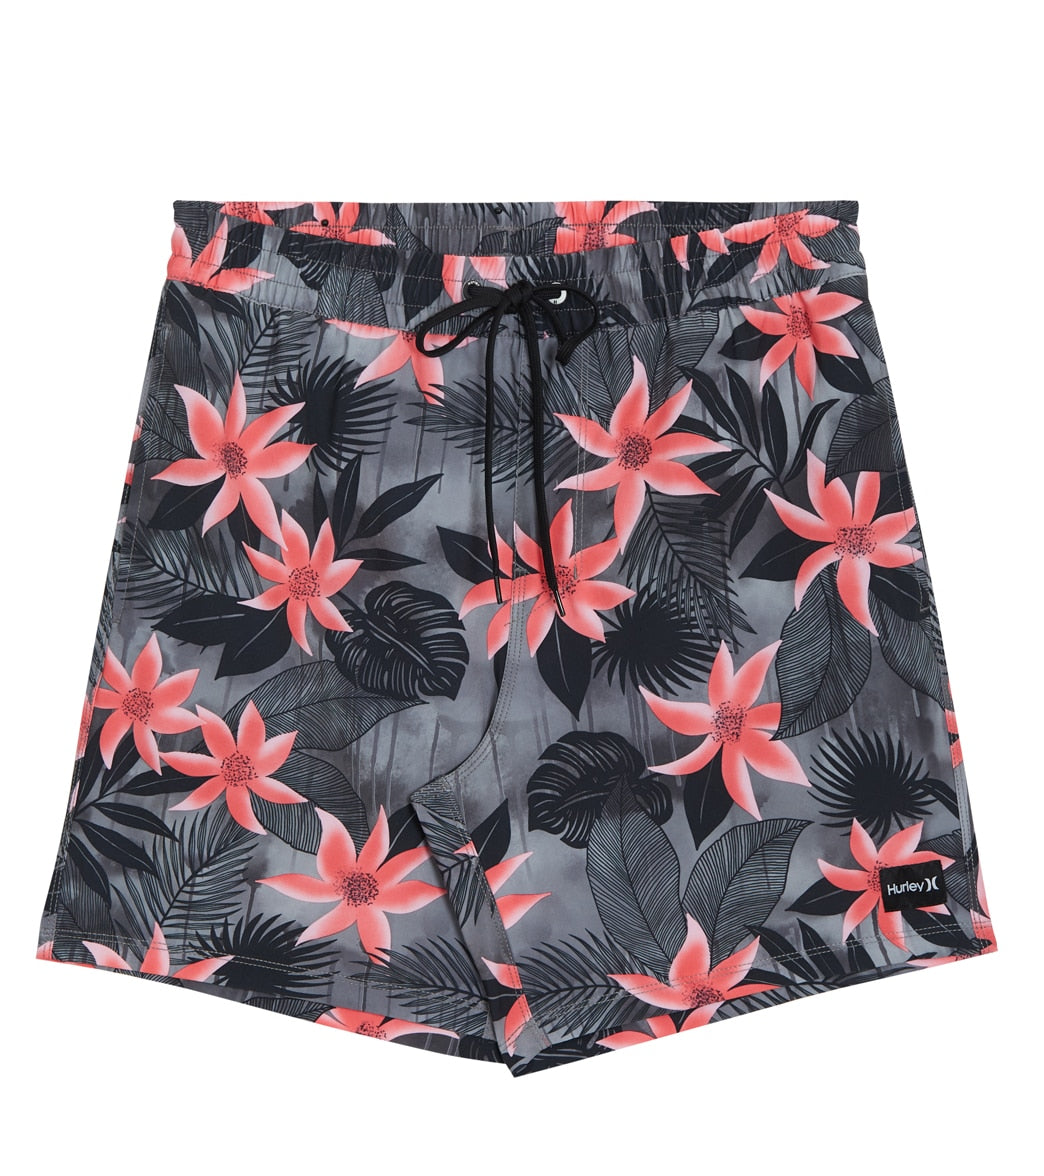 Hurley Mens 17 Cannonball Volley Swim Trunks